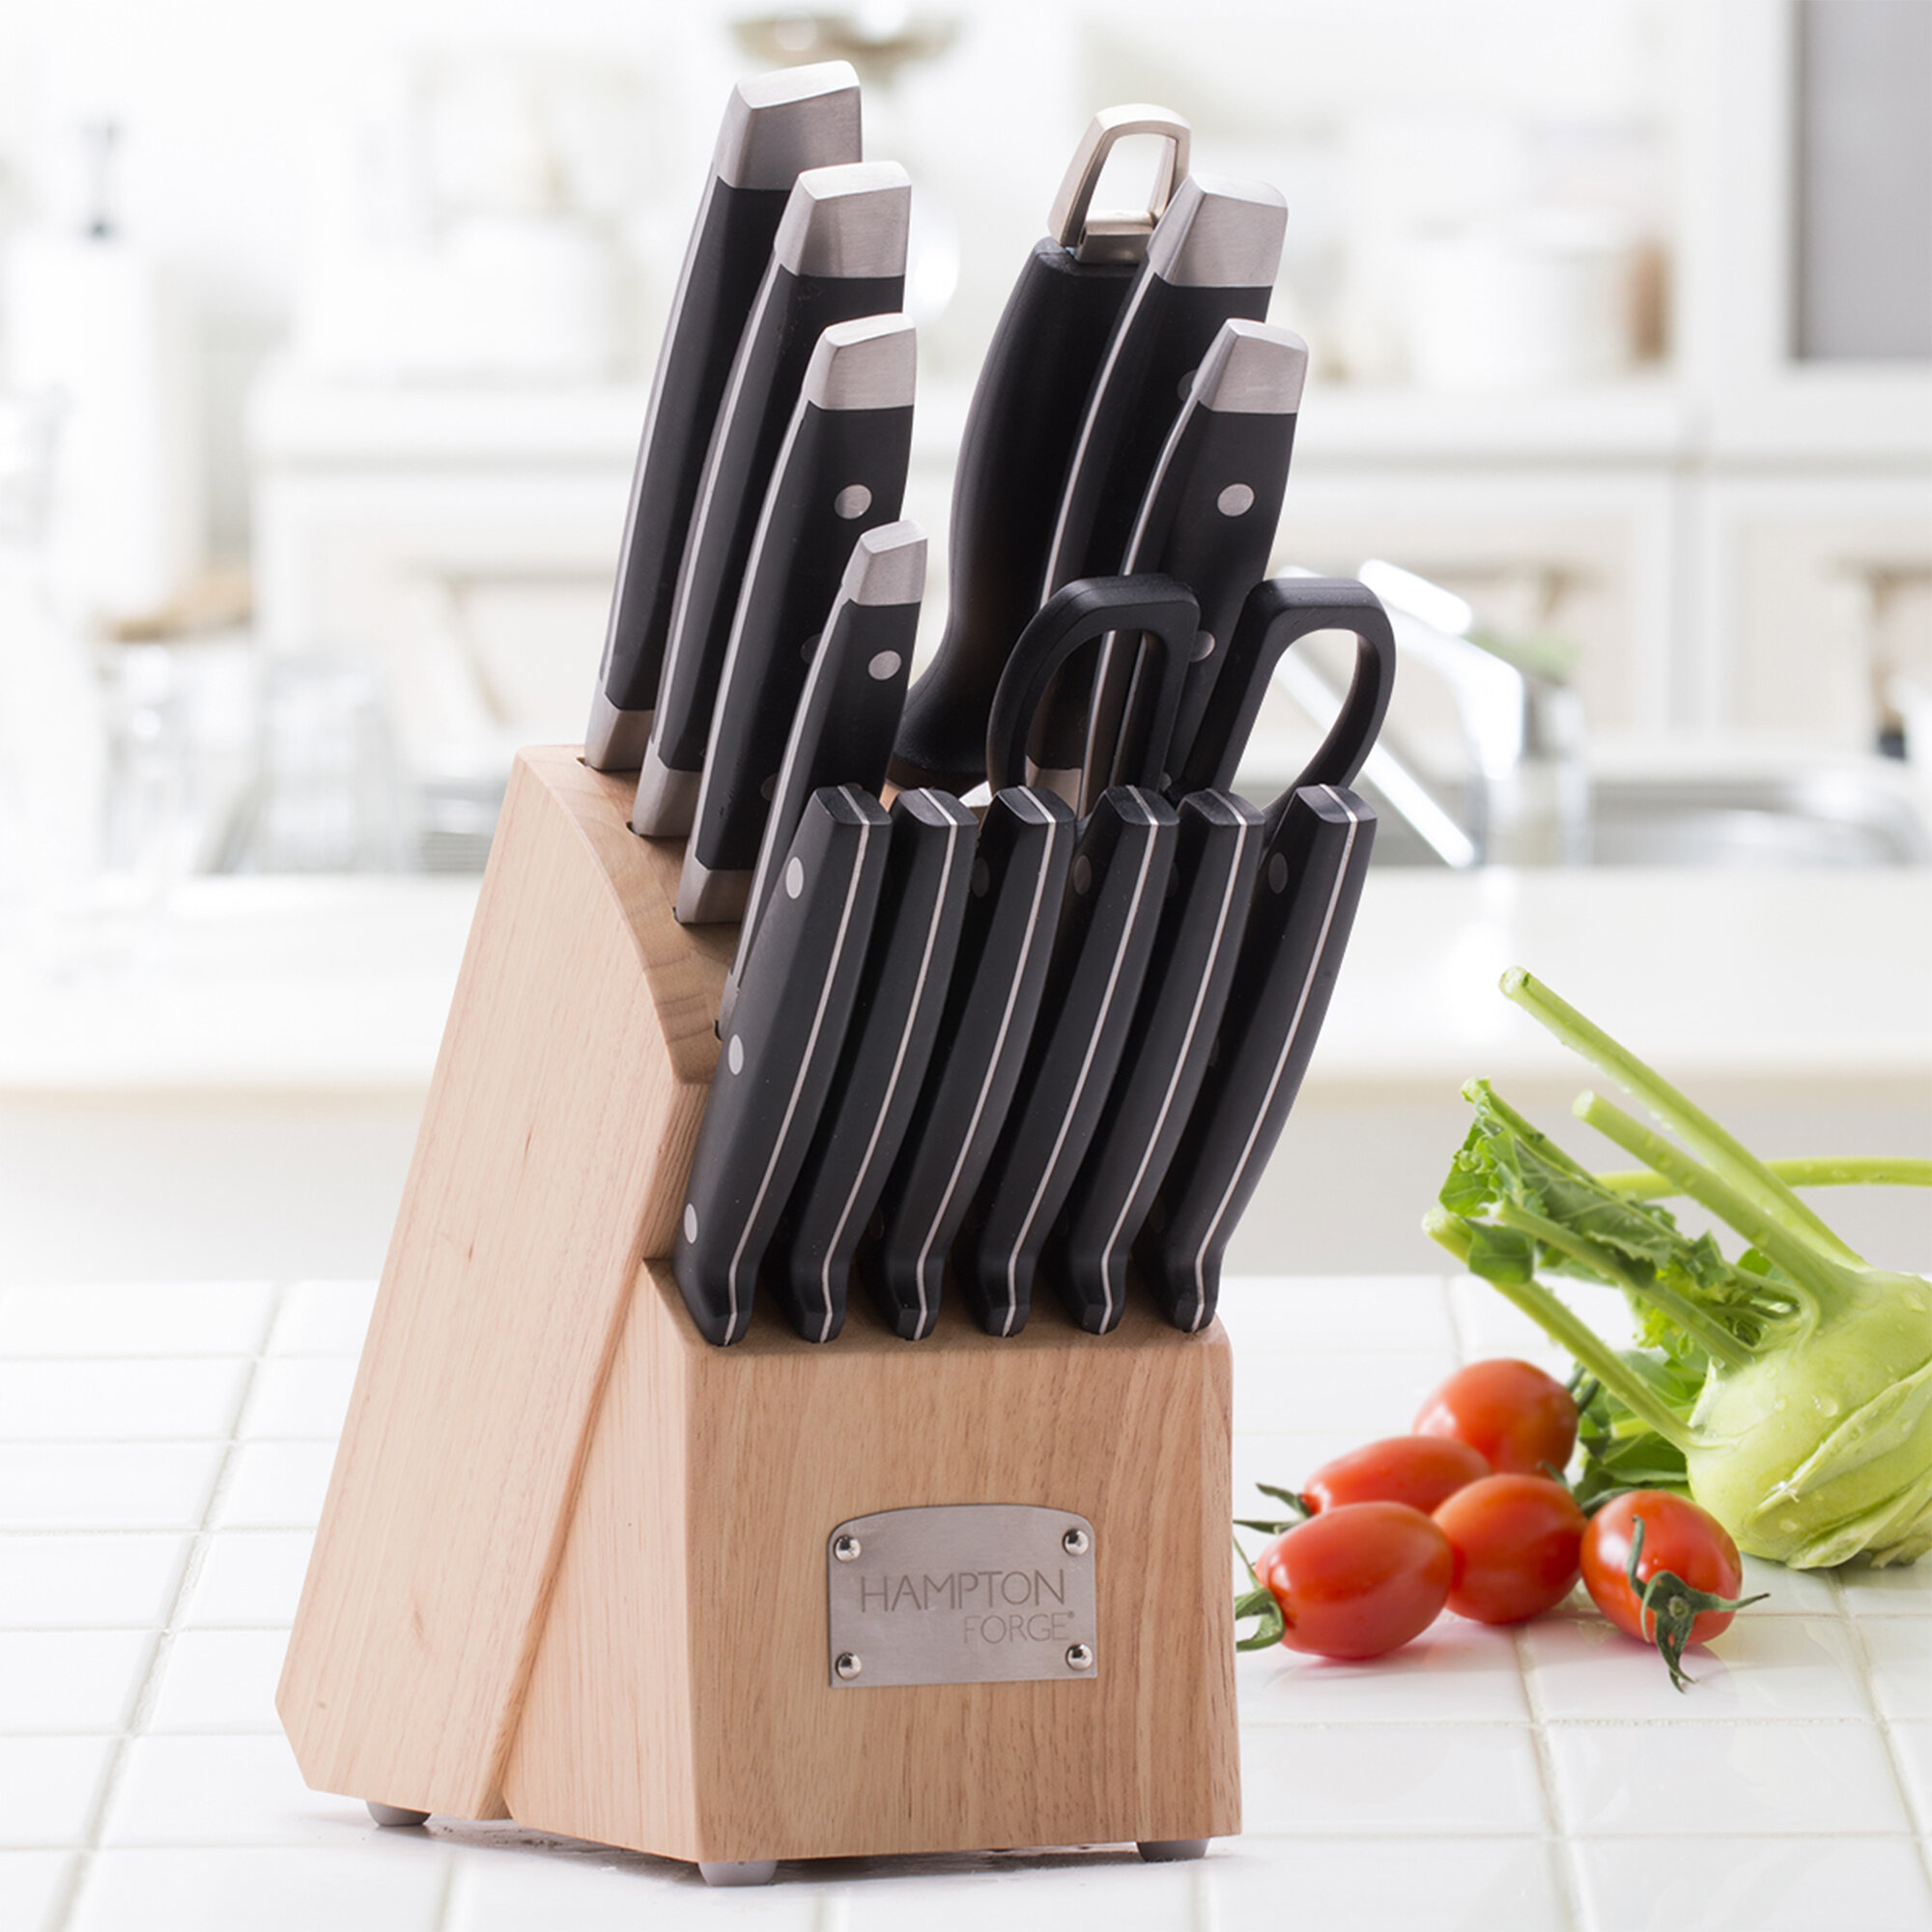 15-Piece Astercook Dishwasher Safe High Carbon Stainless Steel Knife Set  only $39.99